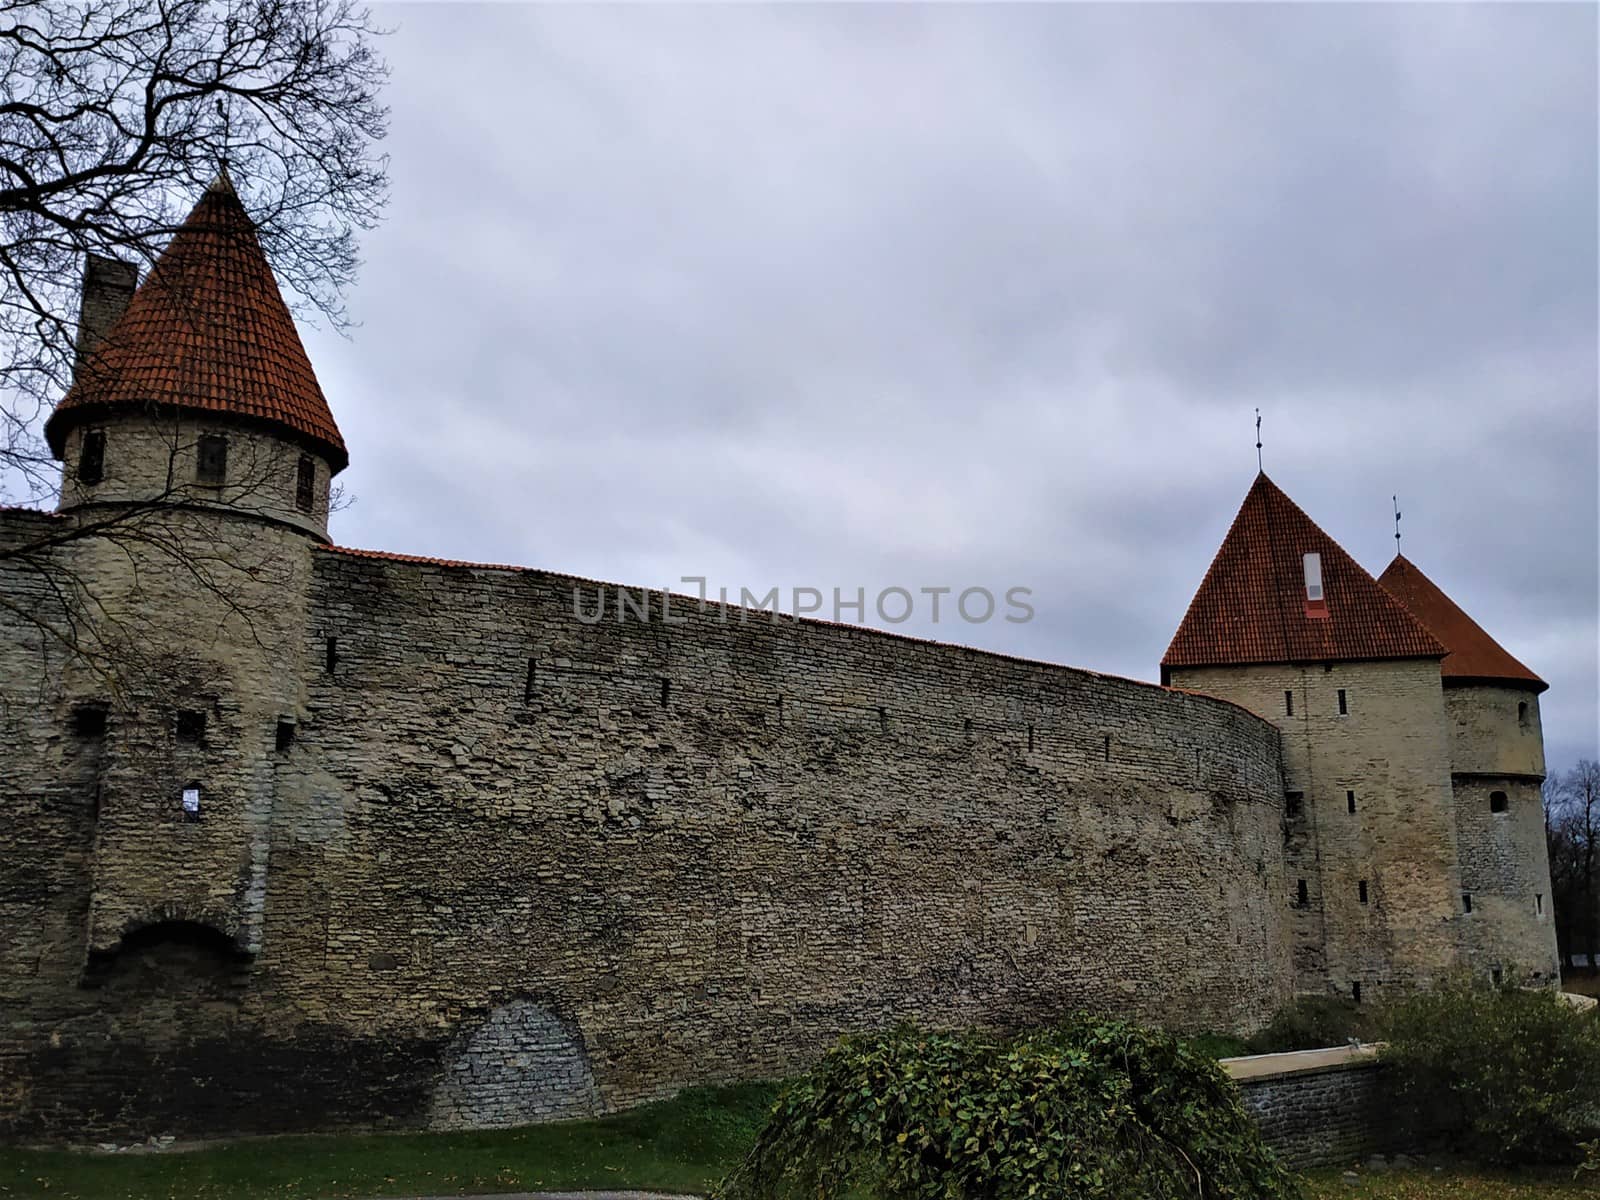 Old city wall of upper town of Tallinn by pisces2386